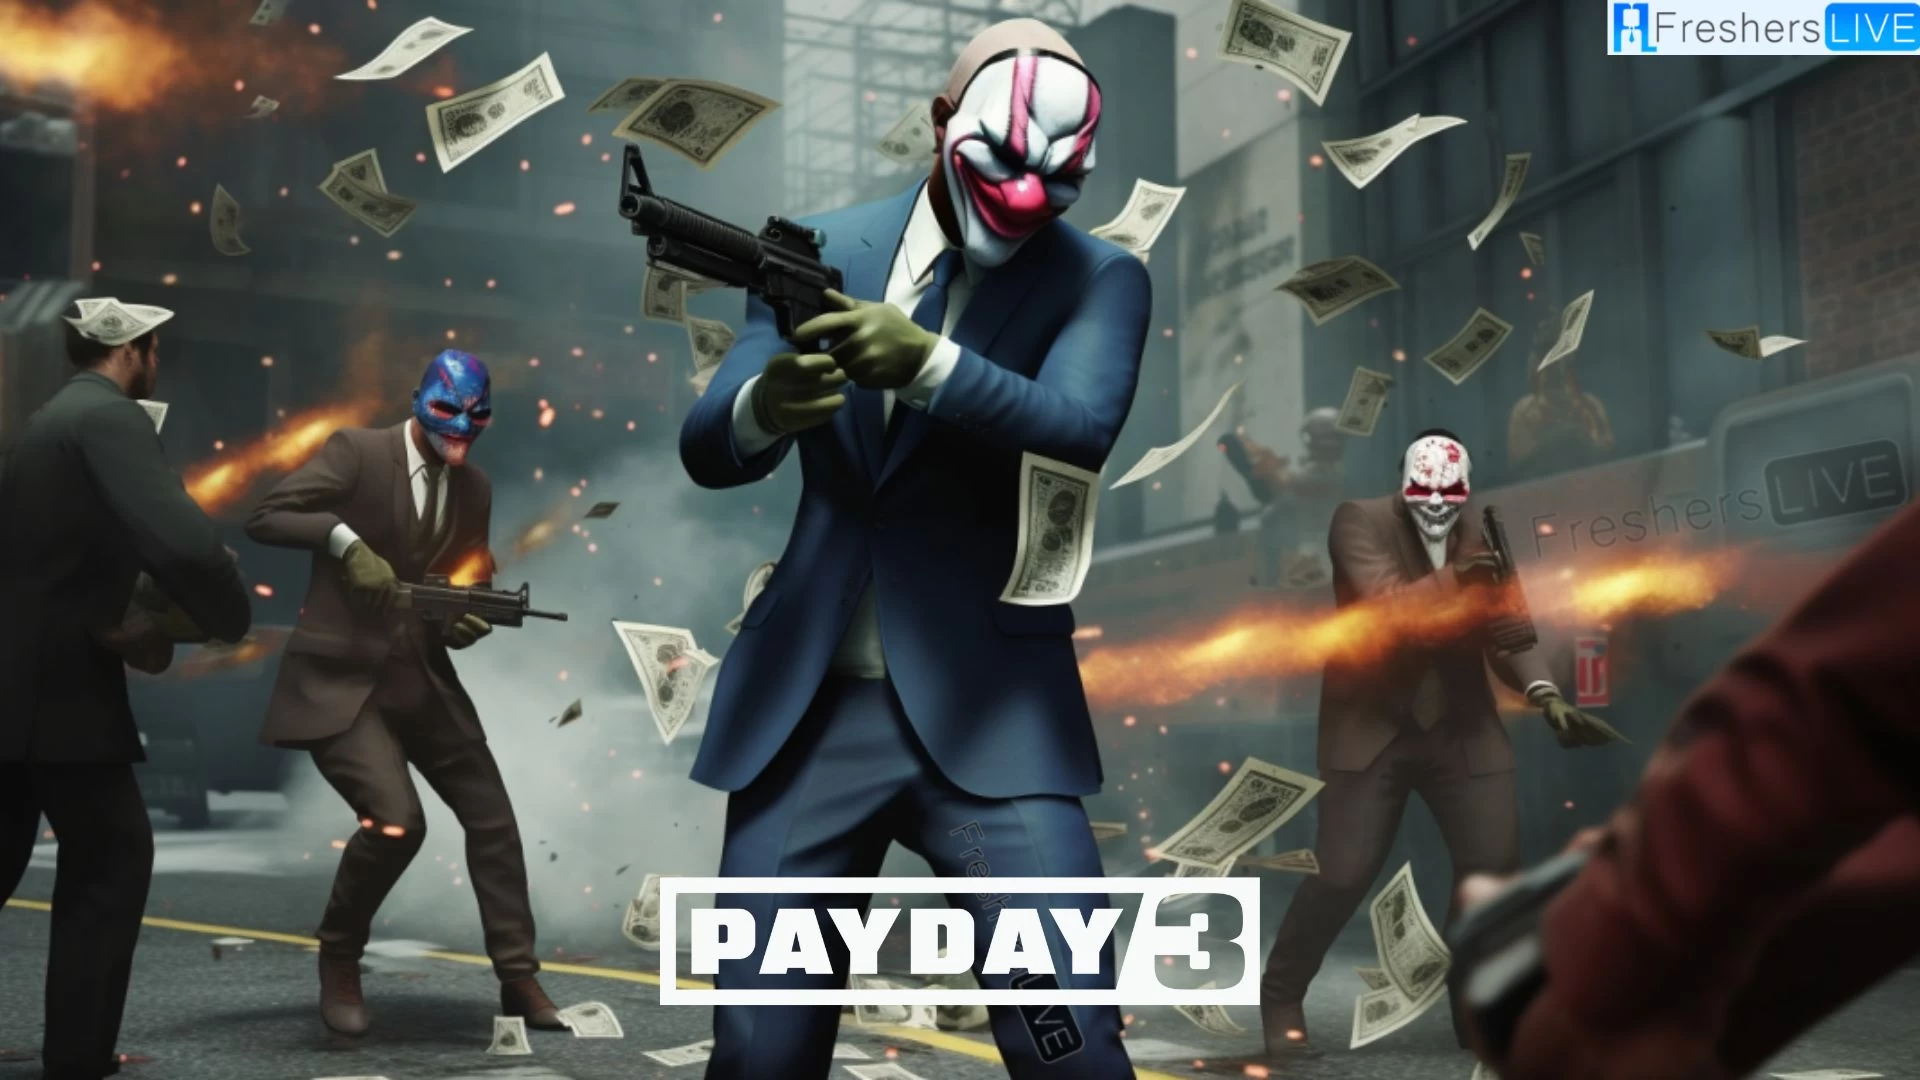 Payday 3 Multiplayer Not Working, How to Fix Payday 3 Multiplayer Not Working?